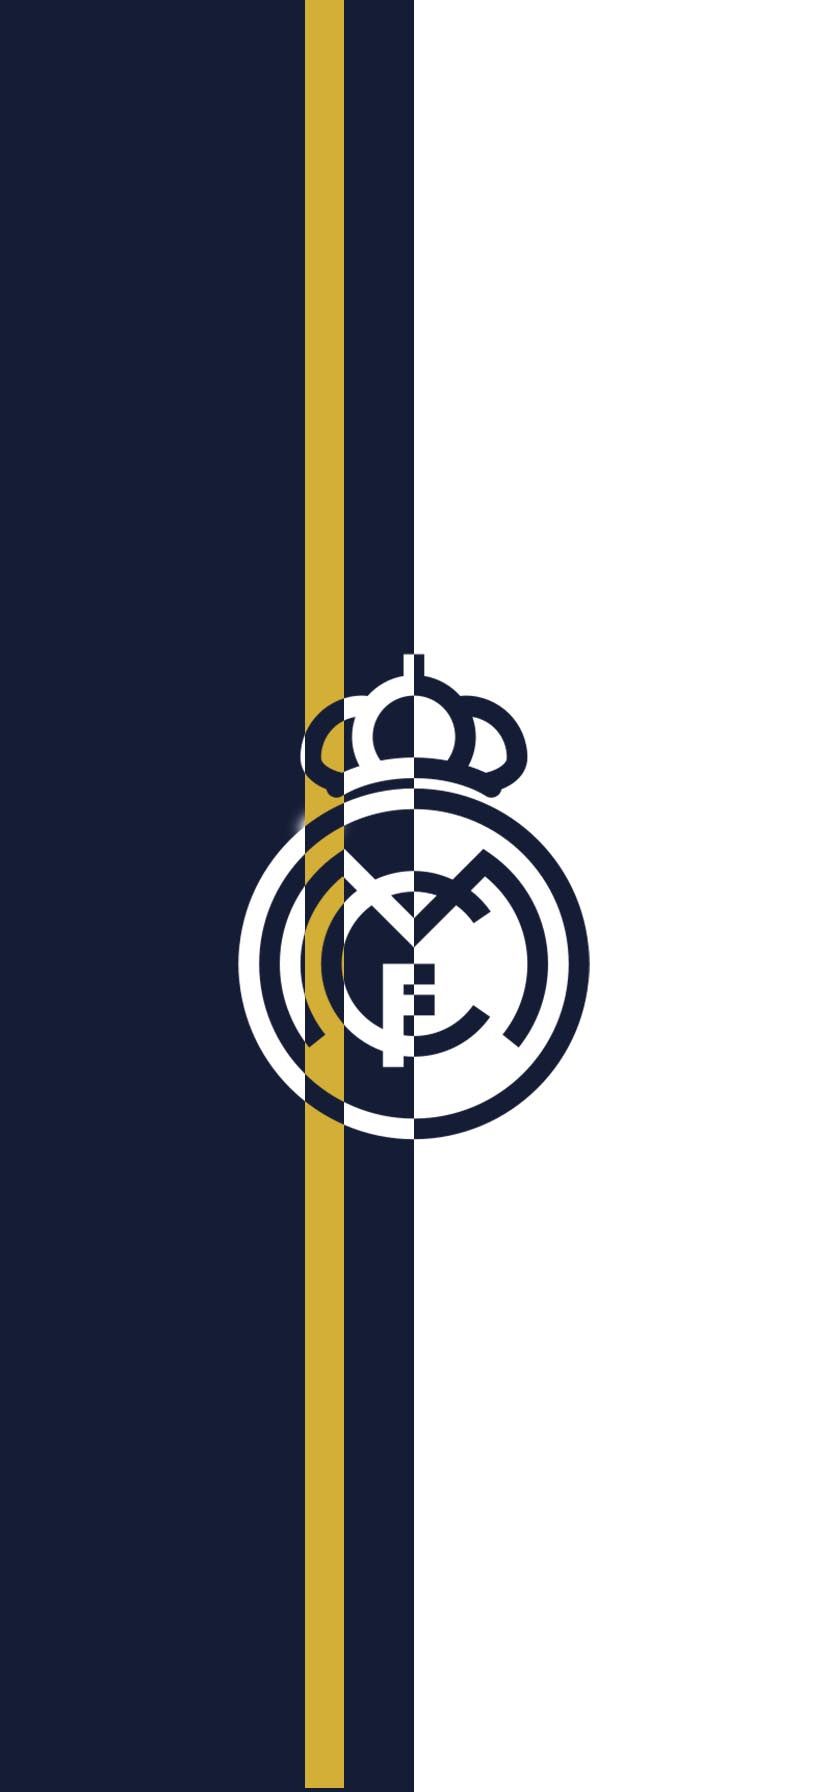 Real Madrid Amoled Wallpapers - Wallpaper Cave